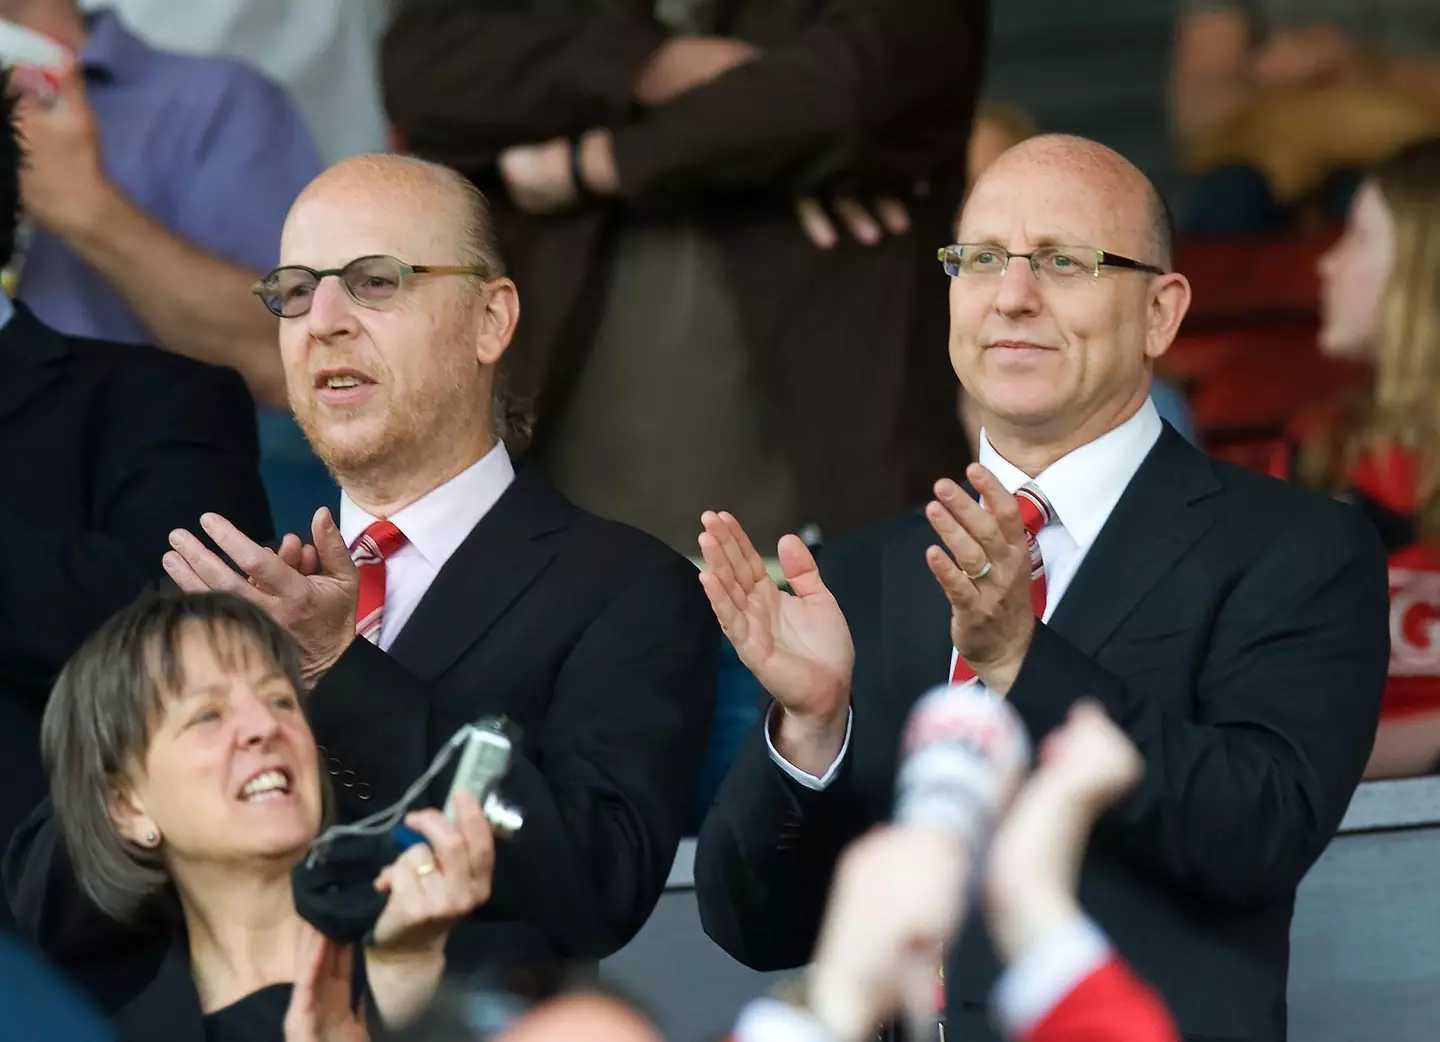 The Glazer family have owned United since 2005. (Alamy)